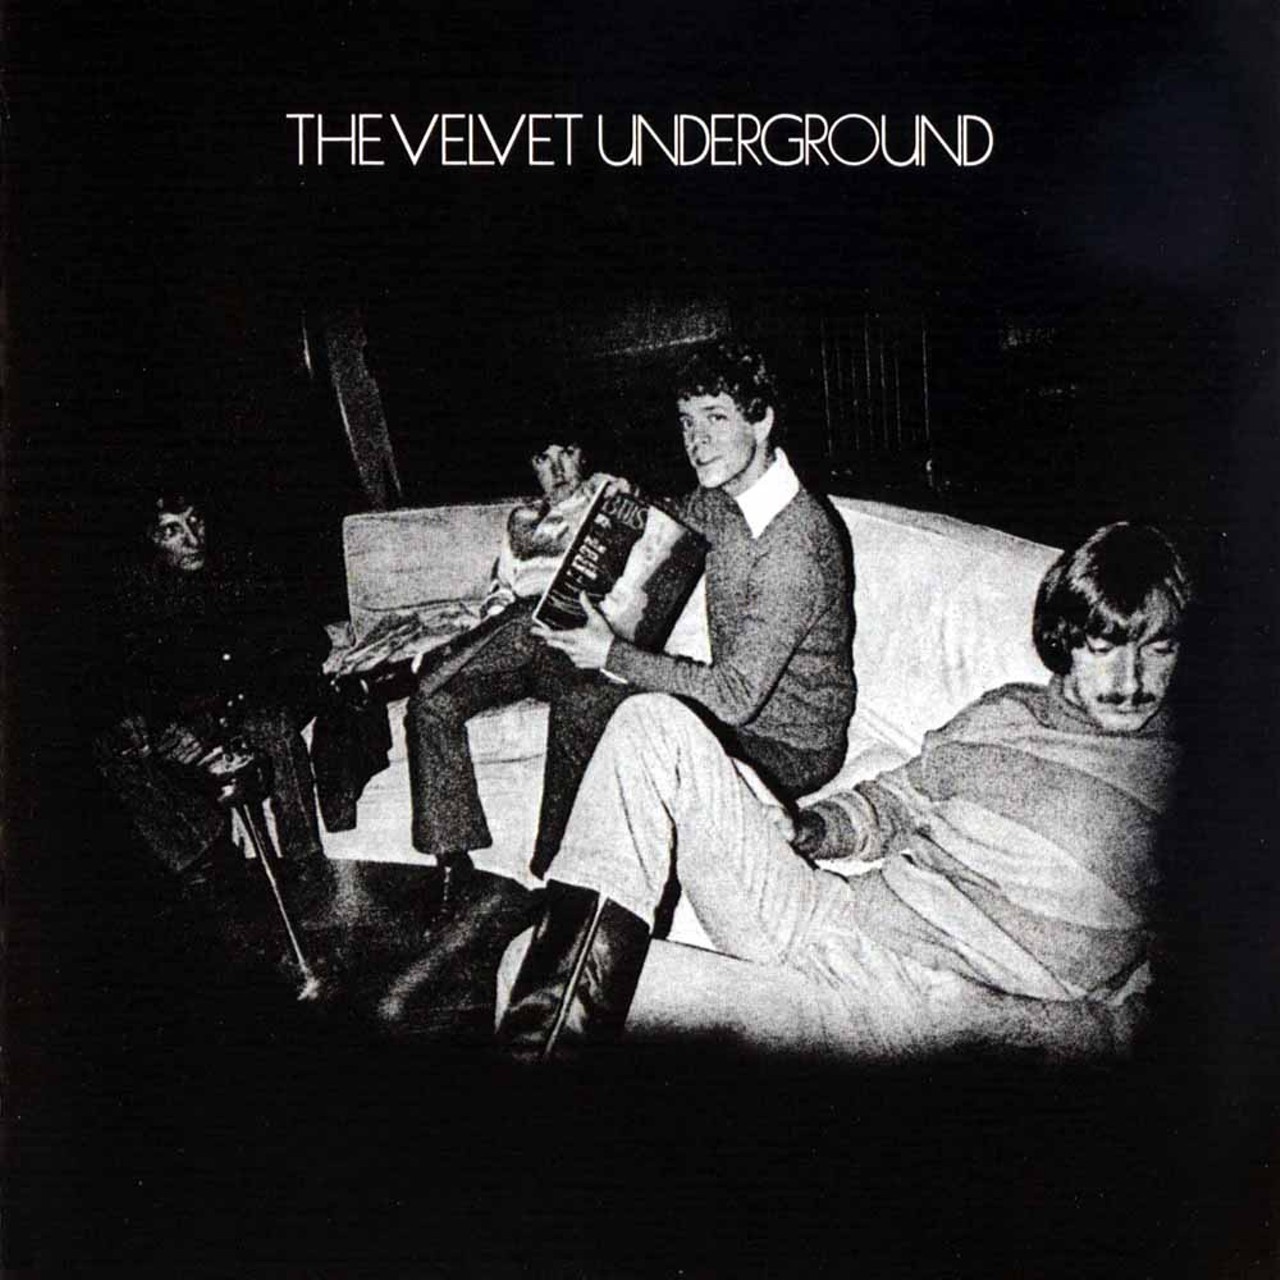 The Velvet Underground
The subject matter was dark and sensual, Reed balancing precariously on the line separating seedy and beauty.